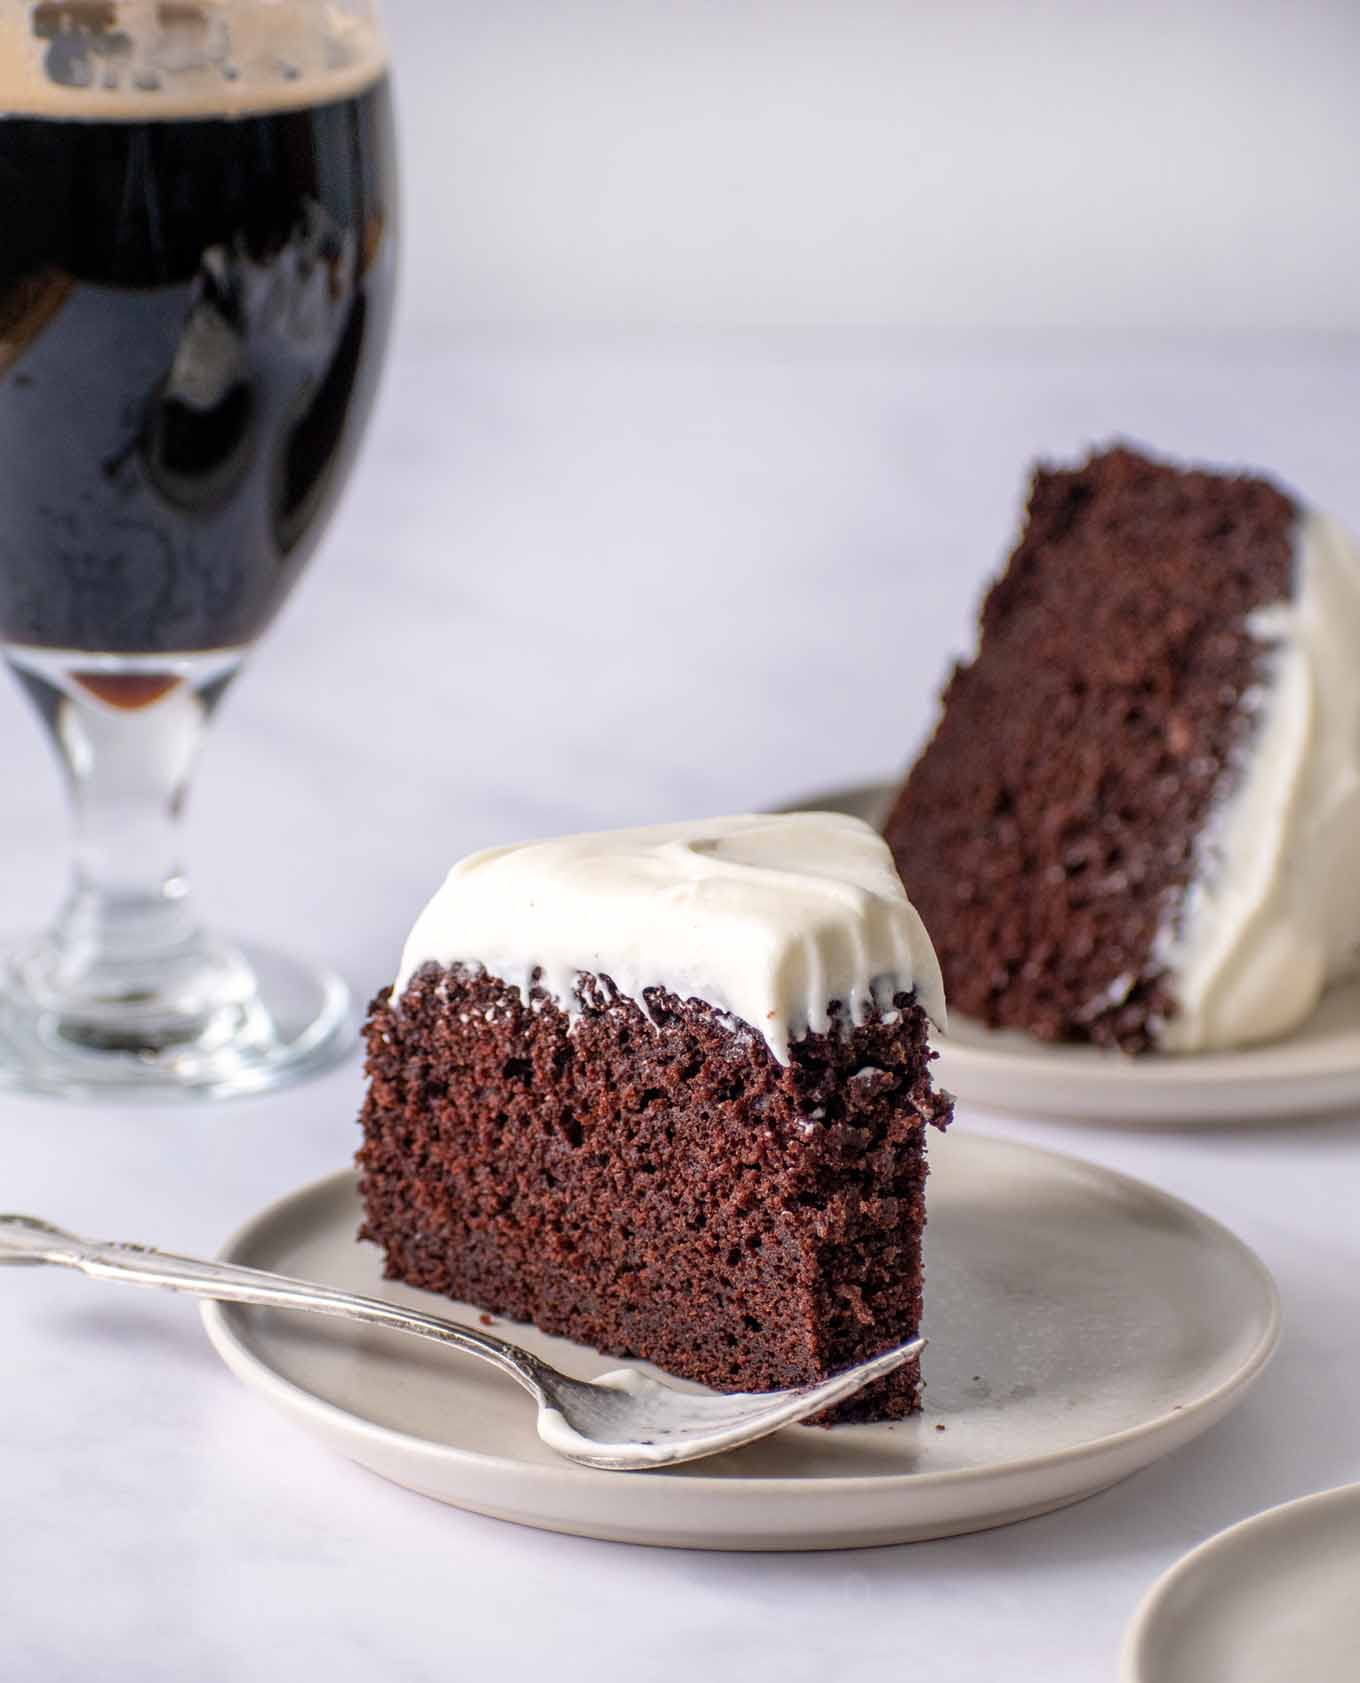 A slice of Guinness Chocolate Cake served on a white plate